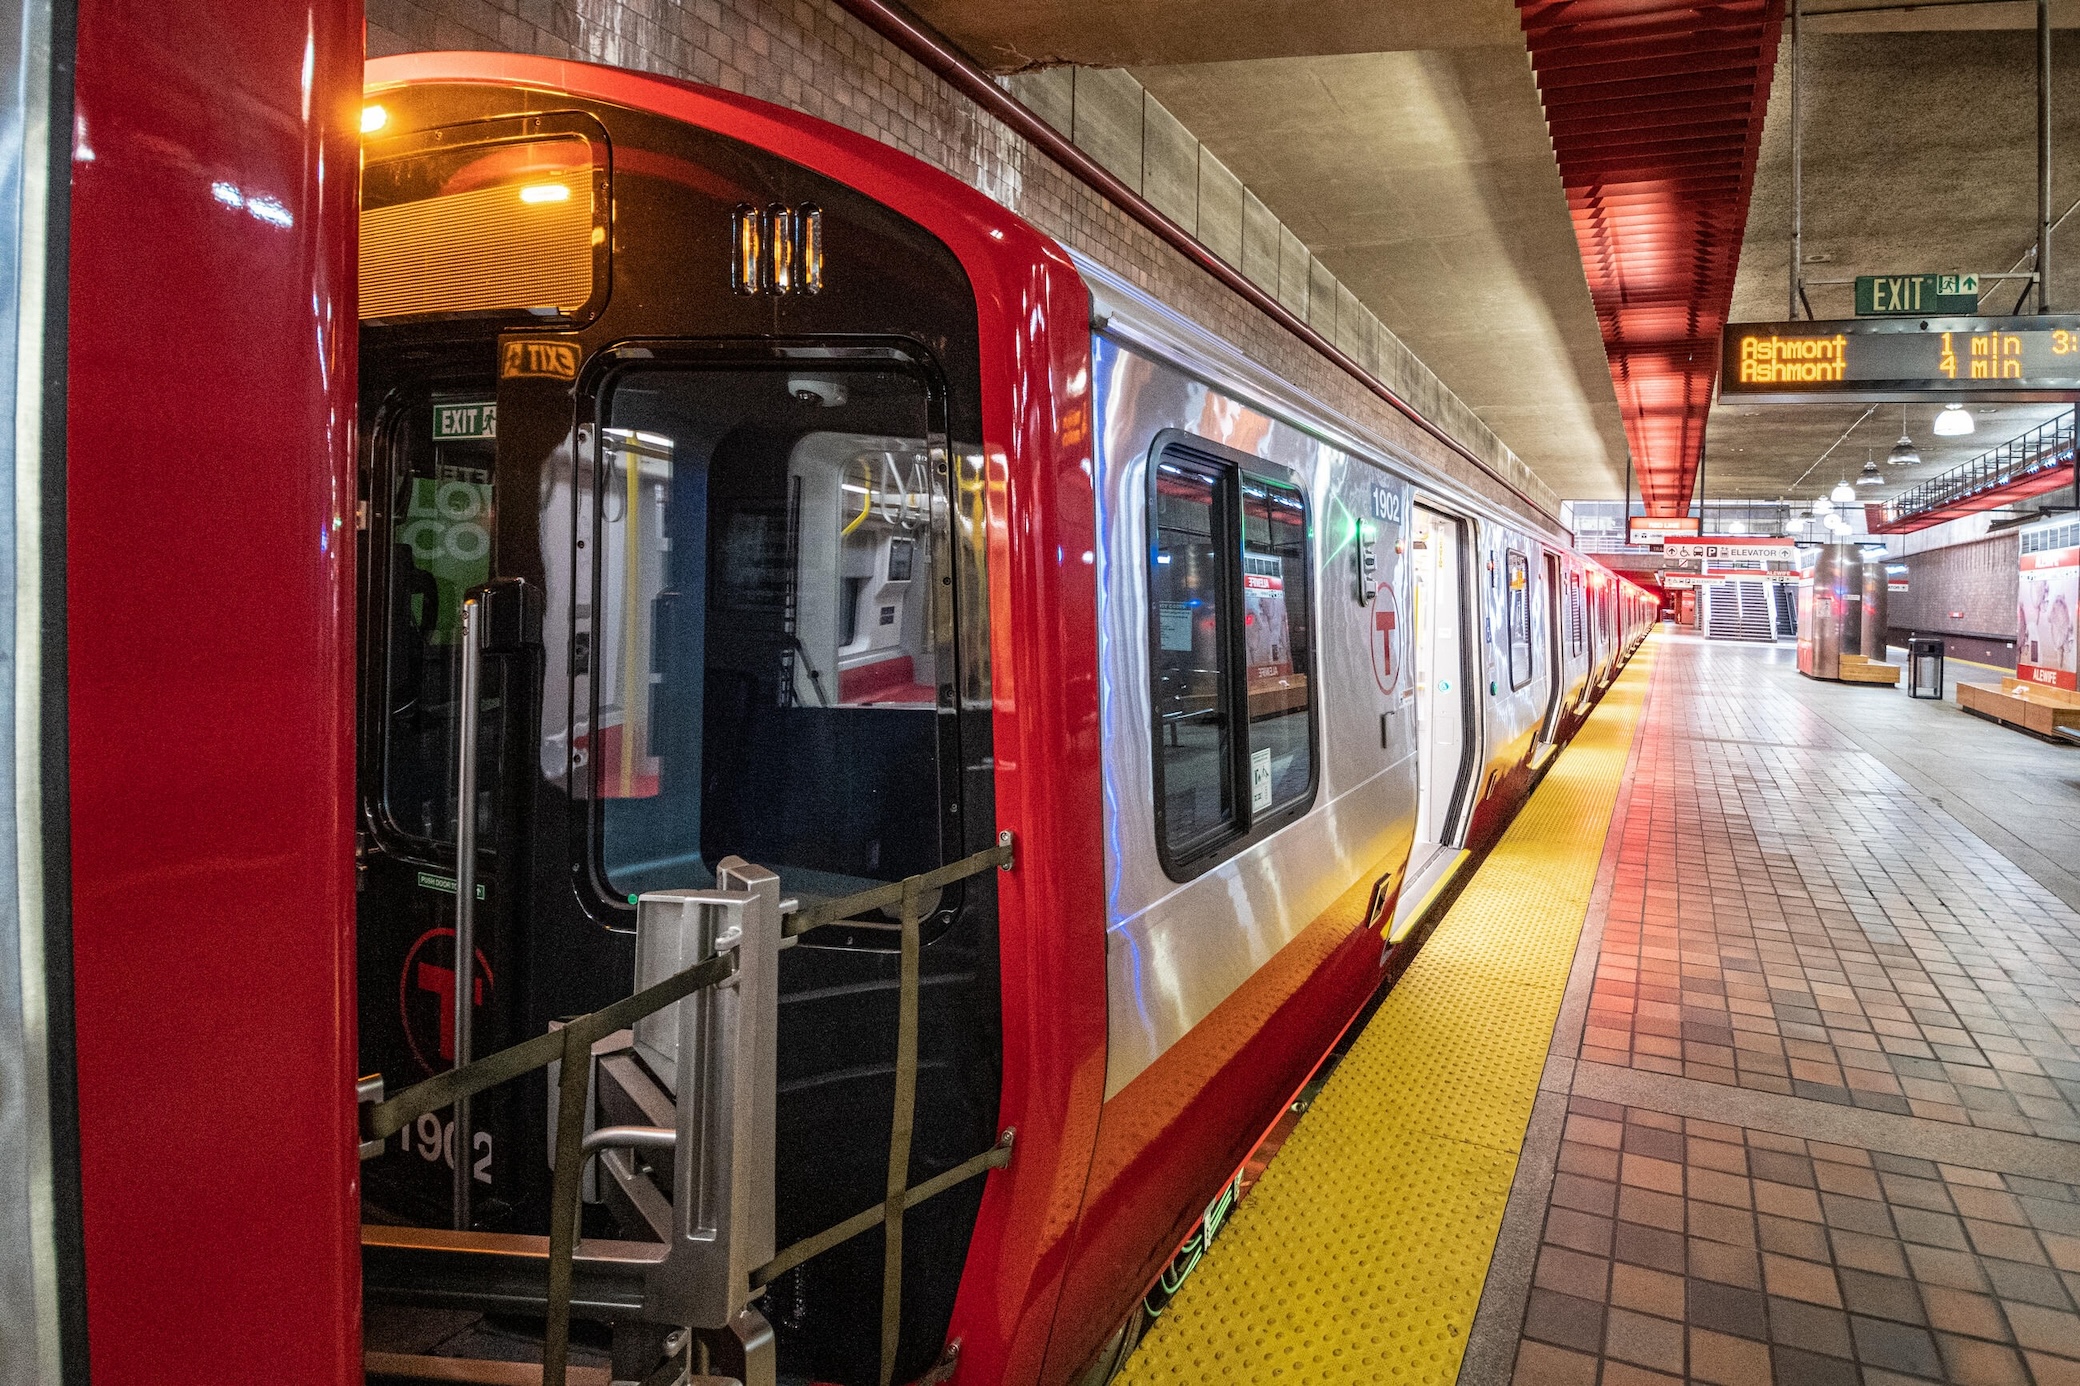 A new train with red trim waits at an empty subway platform.